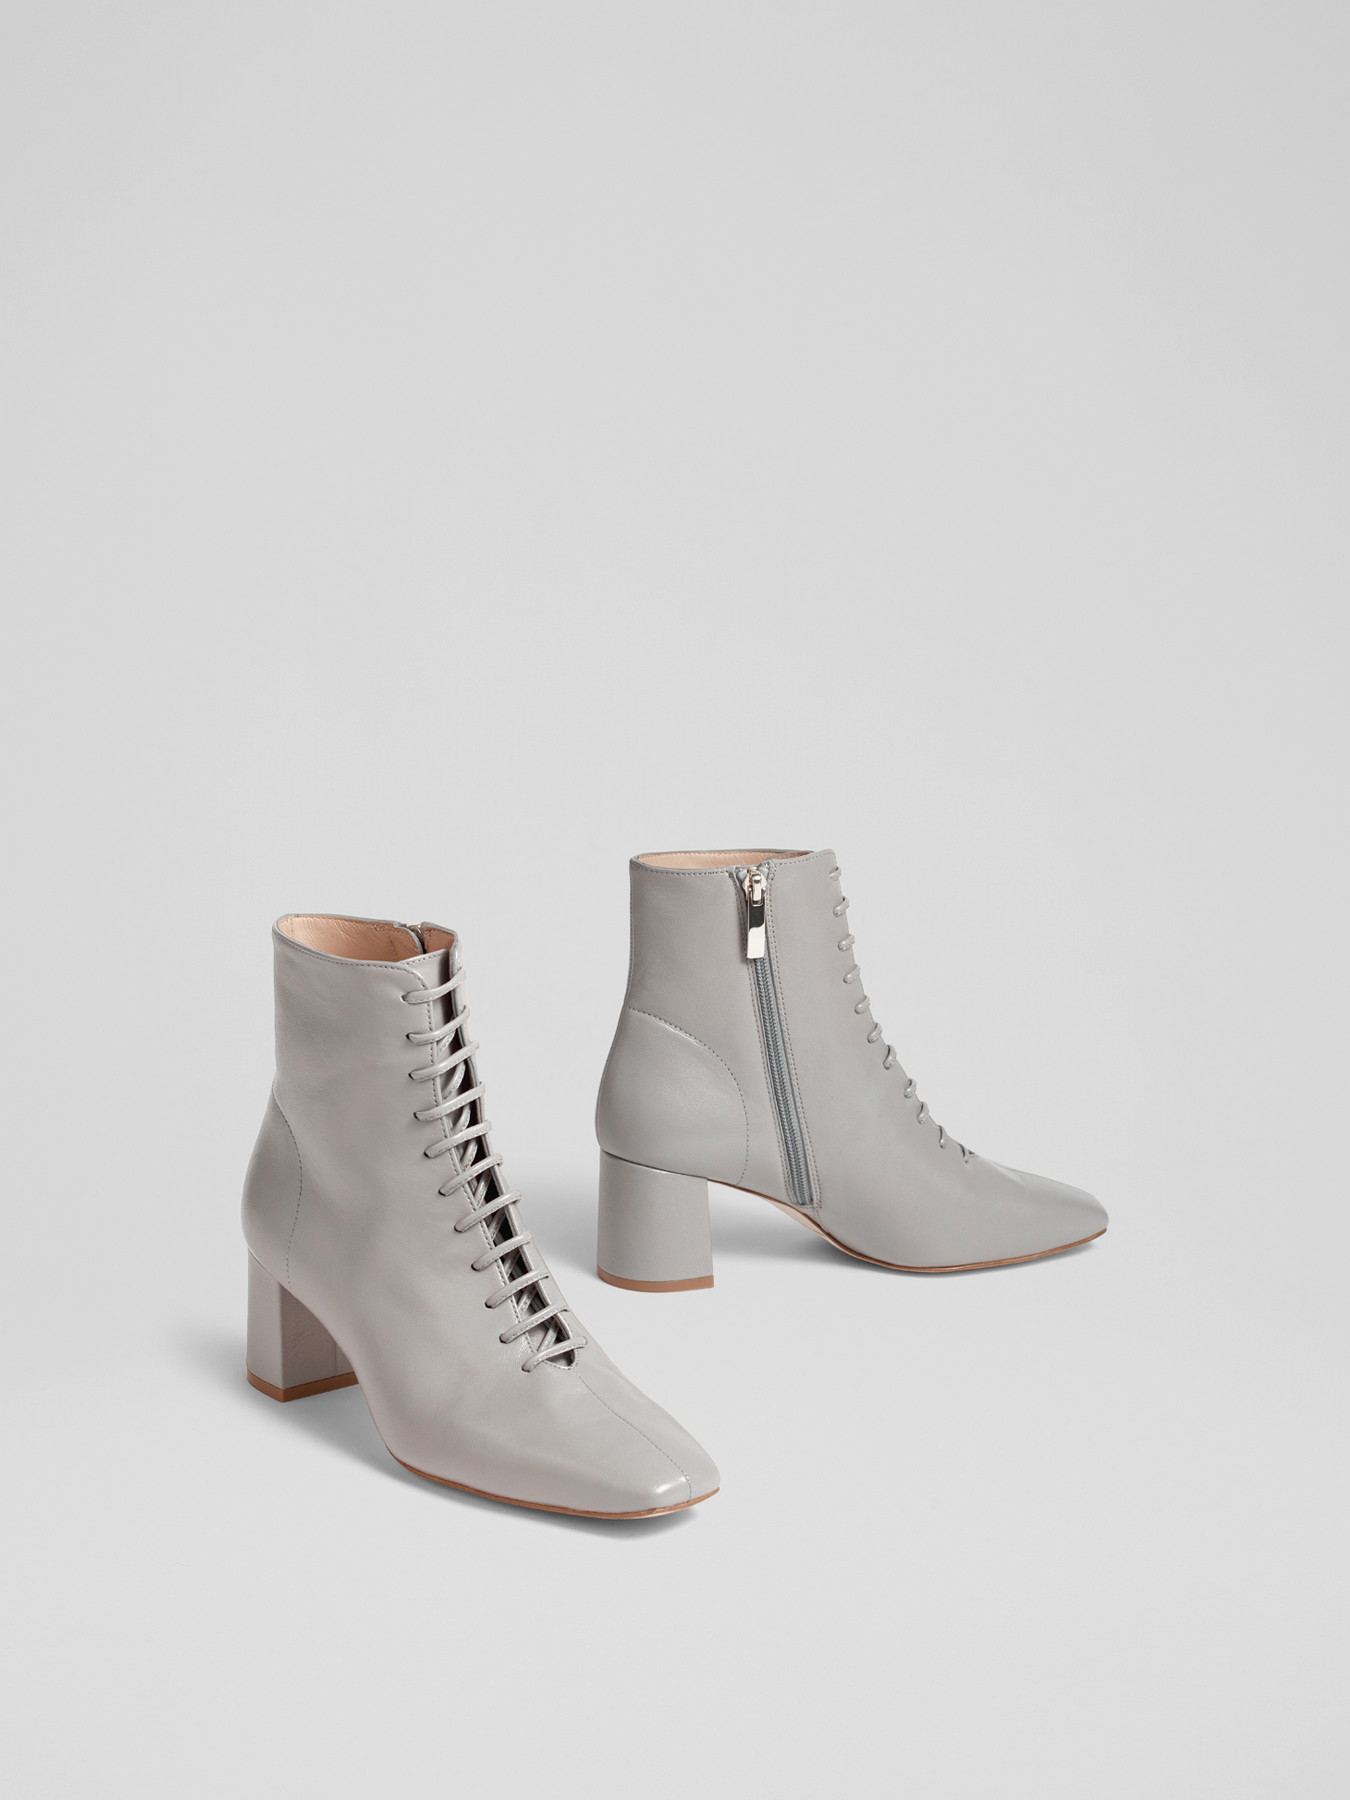 LK Bennett Arabella Grey Leather Lace-Up Ankle Boots | Ankle Boots | Fenwick